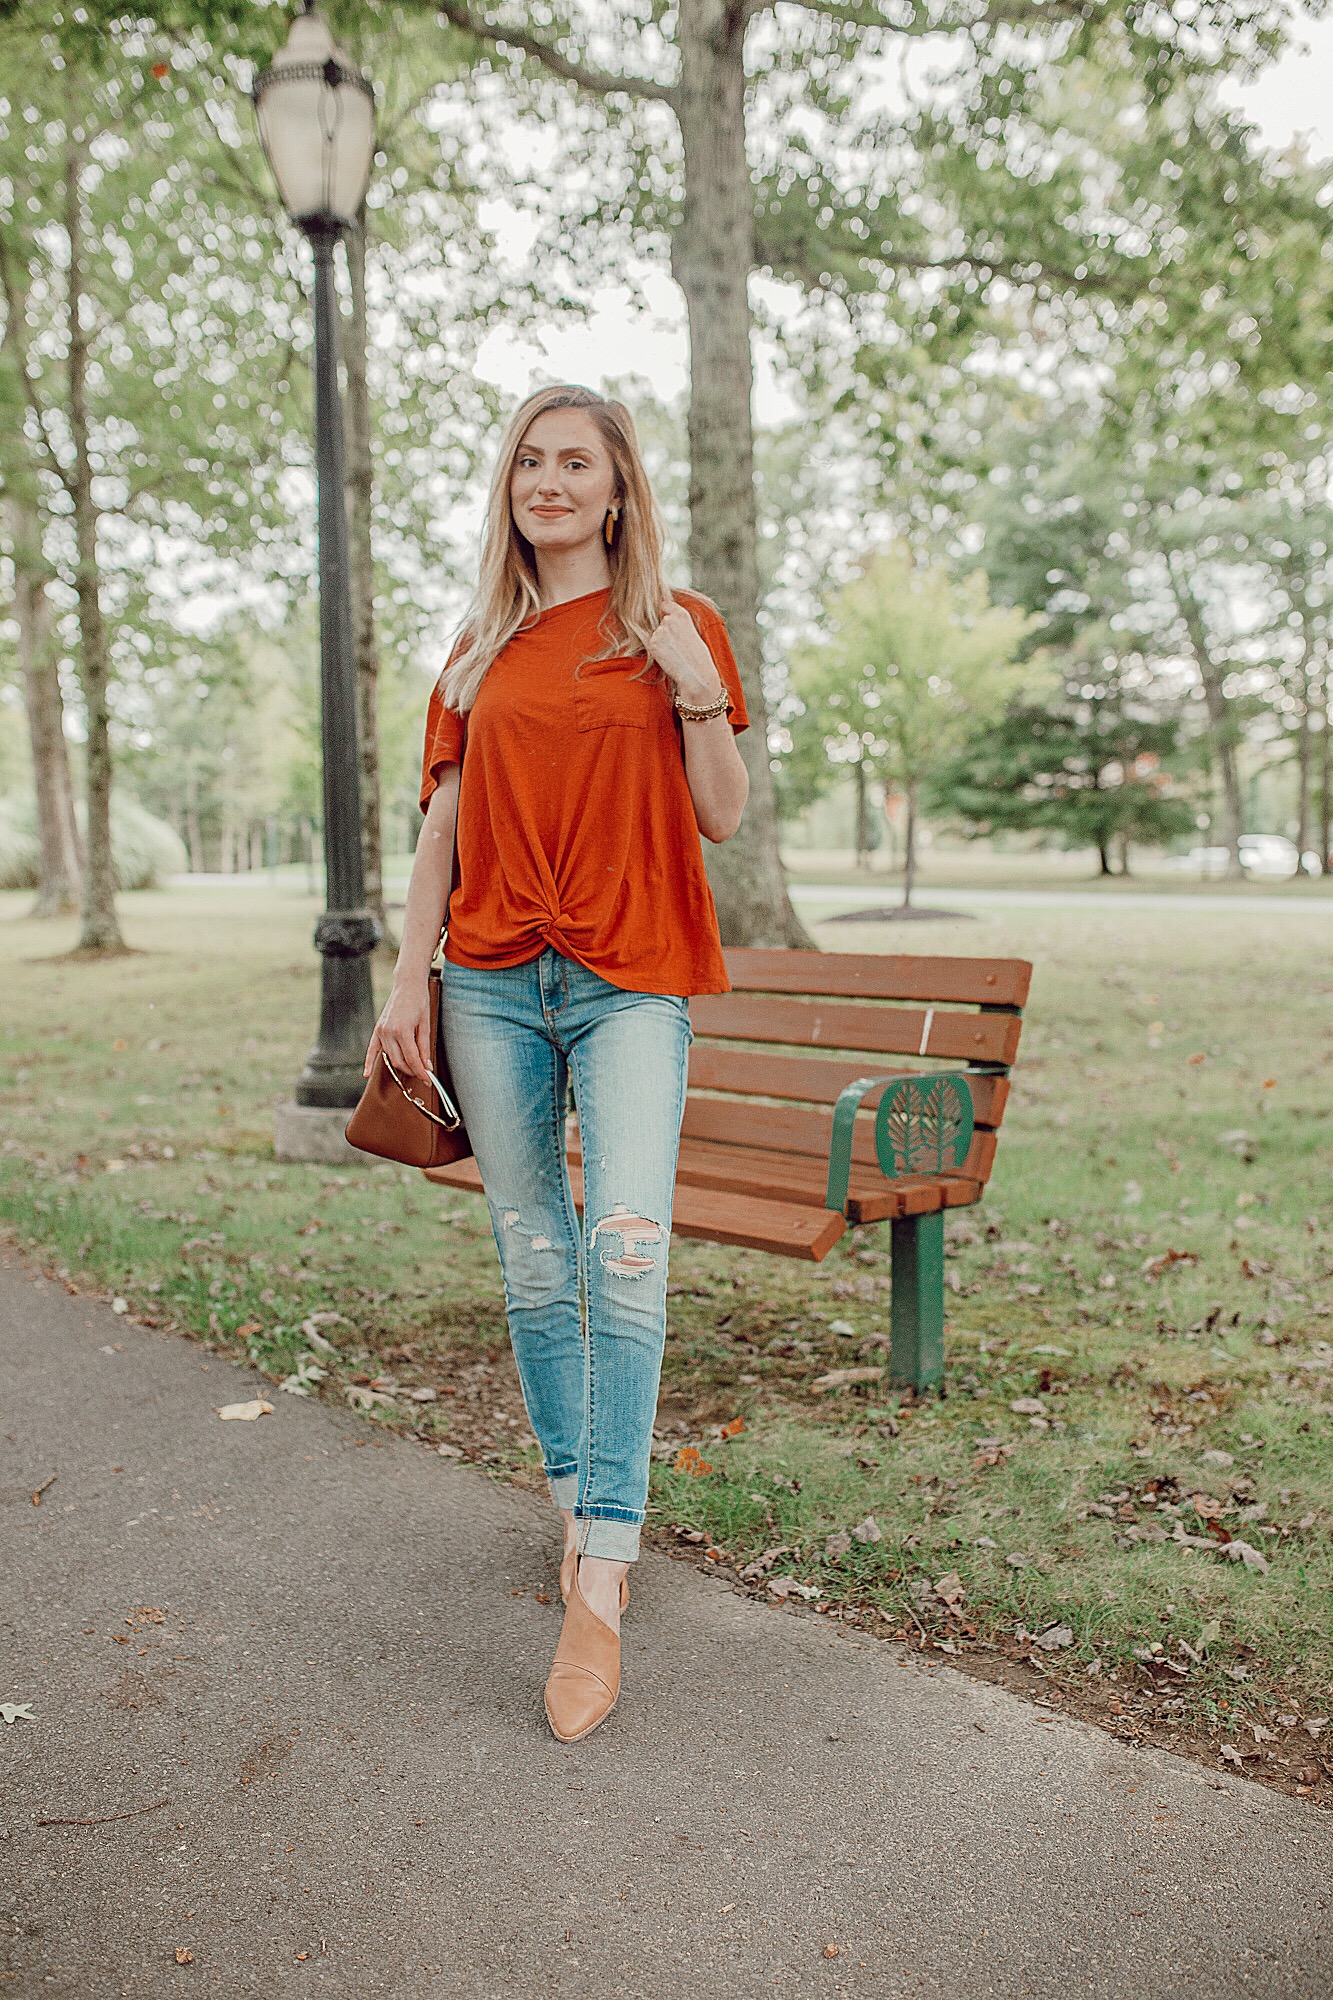 The Comfortable Wenda Cut Out Ankle Boots from target- Review and fall outfit inspiration by North Carolina fashion and lifestyle blogger Jessica Linn.